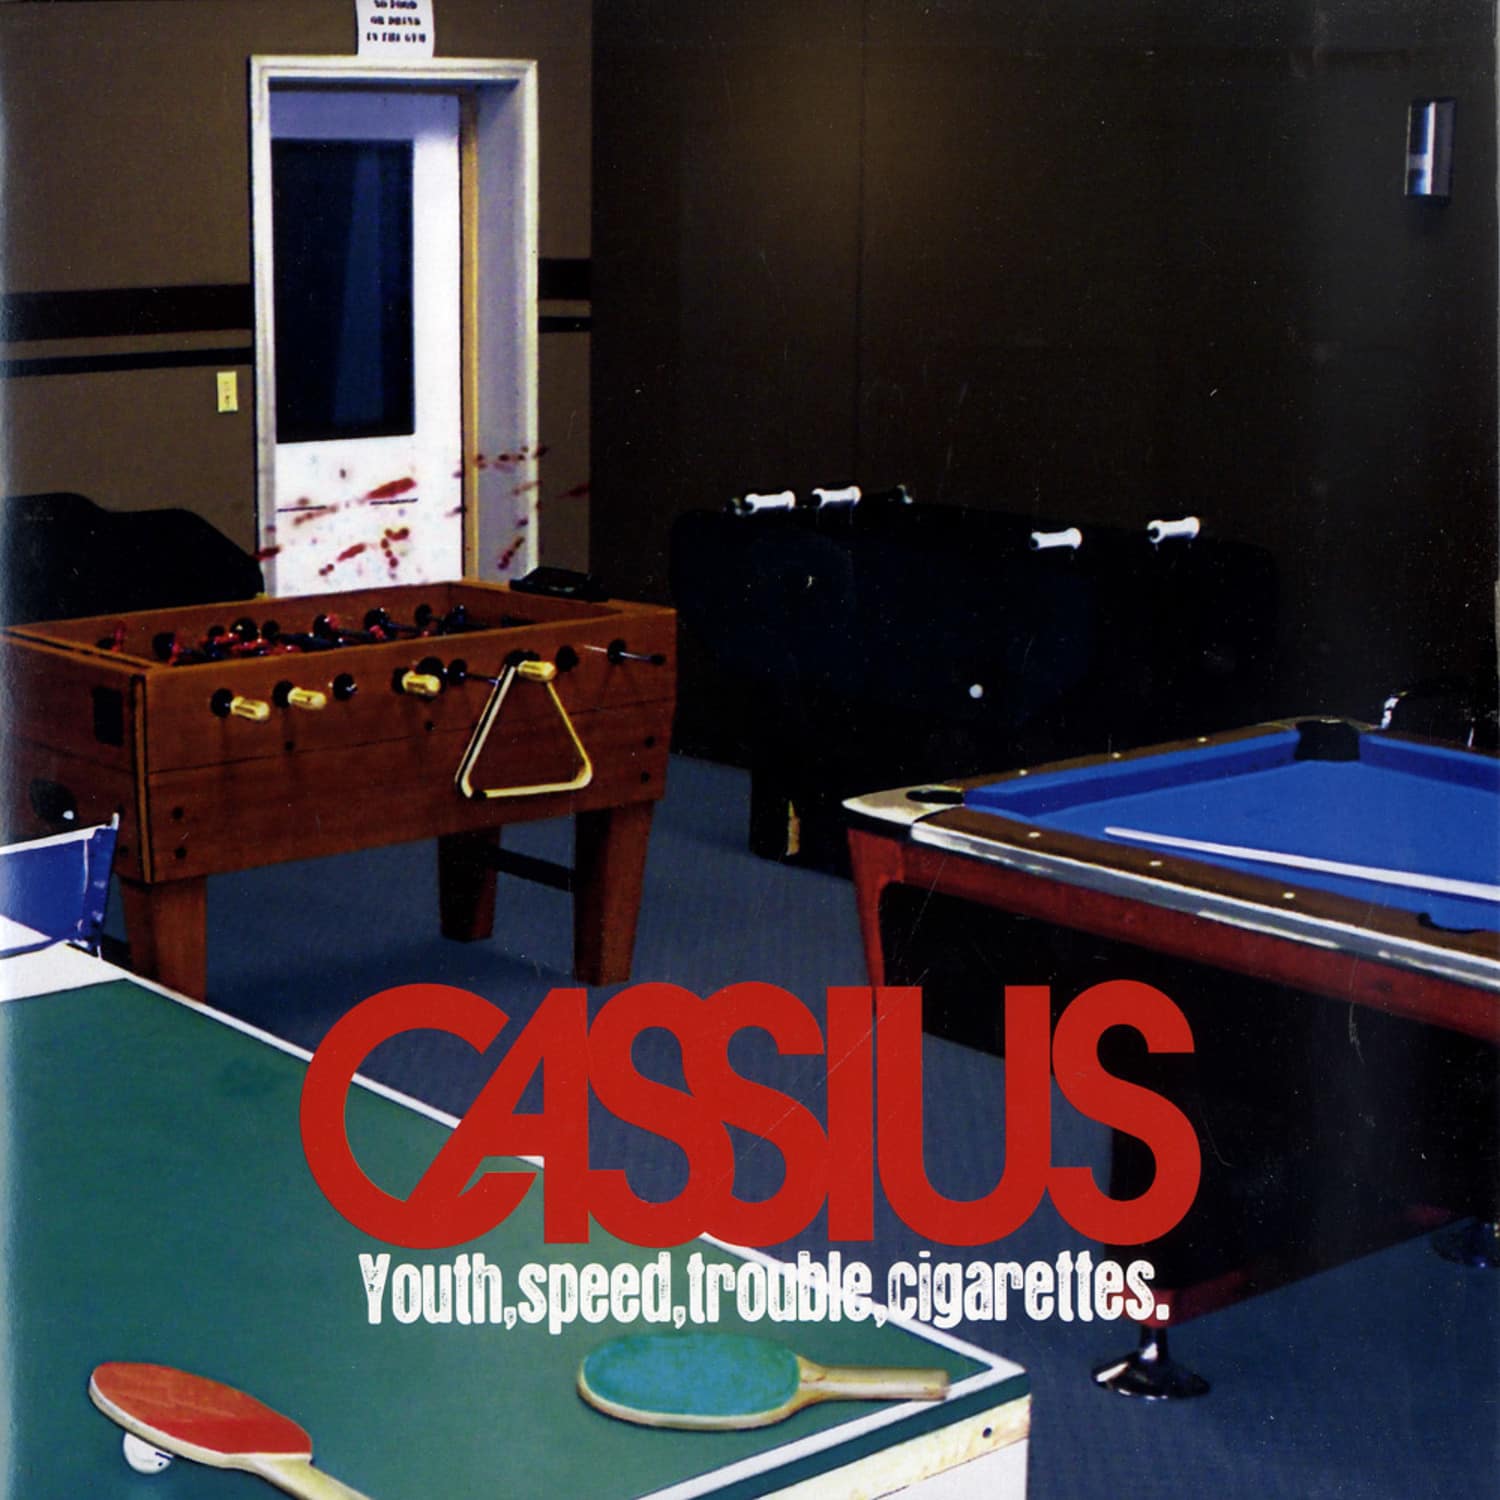 Cassius - YOUTH SPEED TROUBLE CIGARETTES